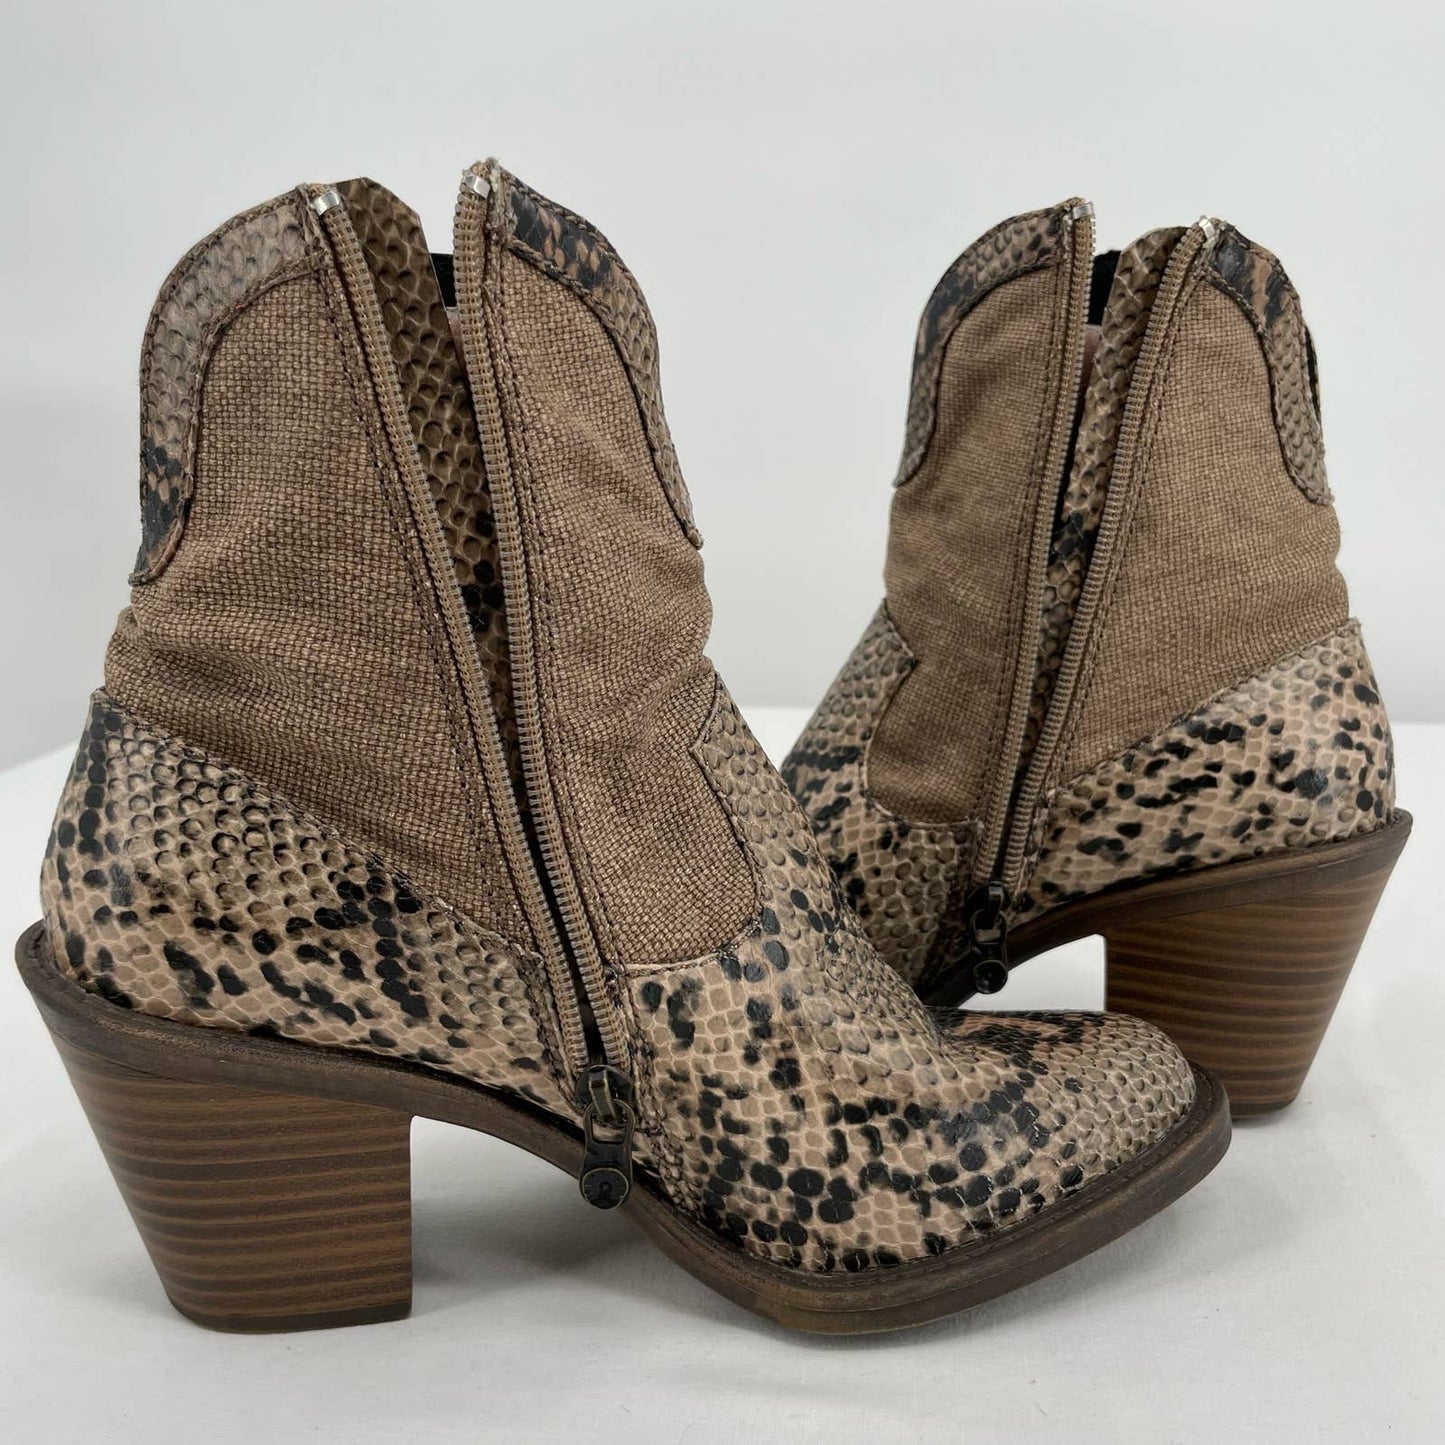 Blowfish Lolly Snake Snakeskin Burlap Neutral Tone Western Style Ankle Booties Size 7